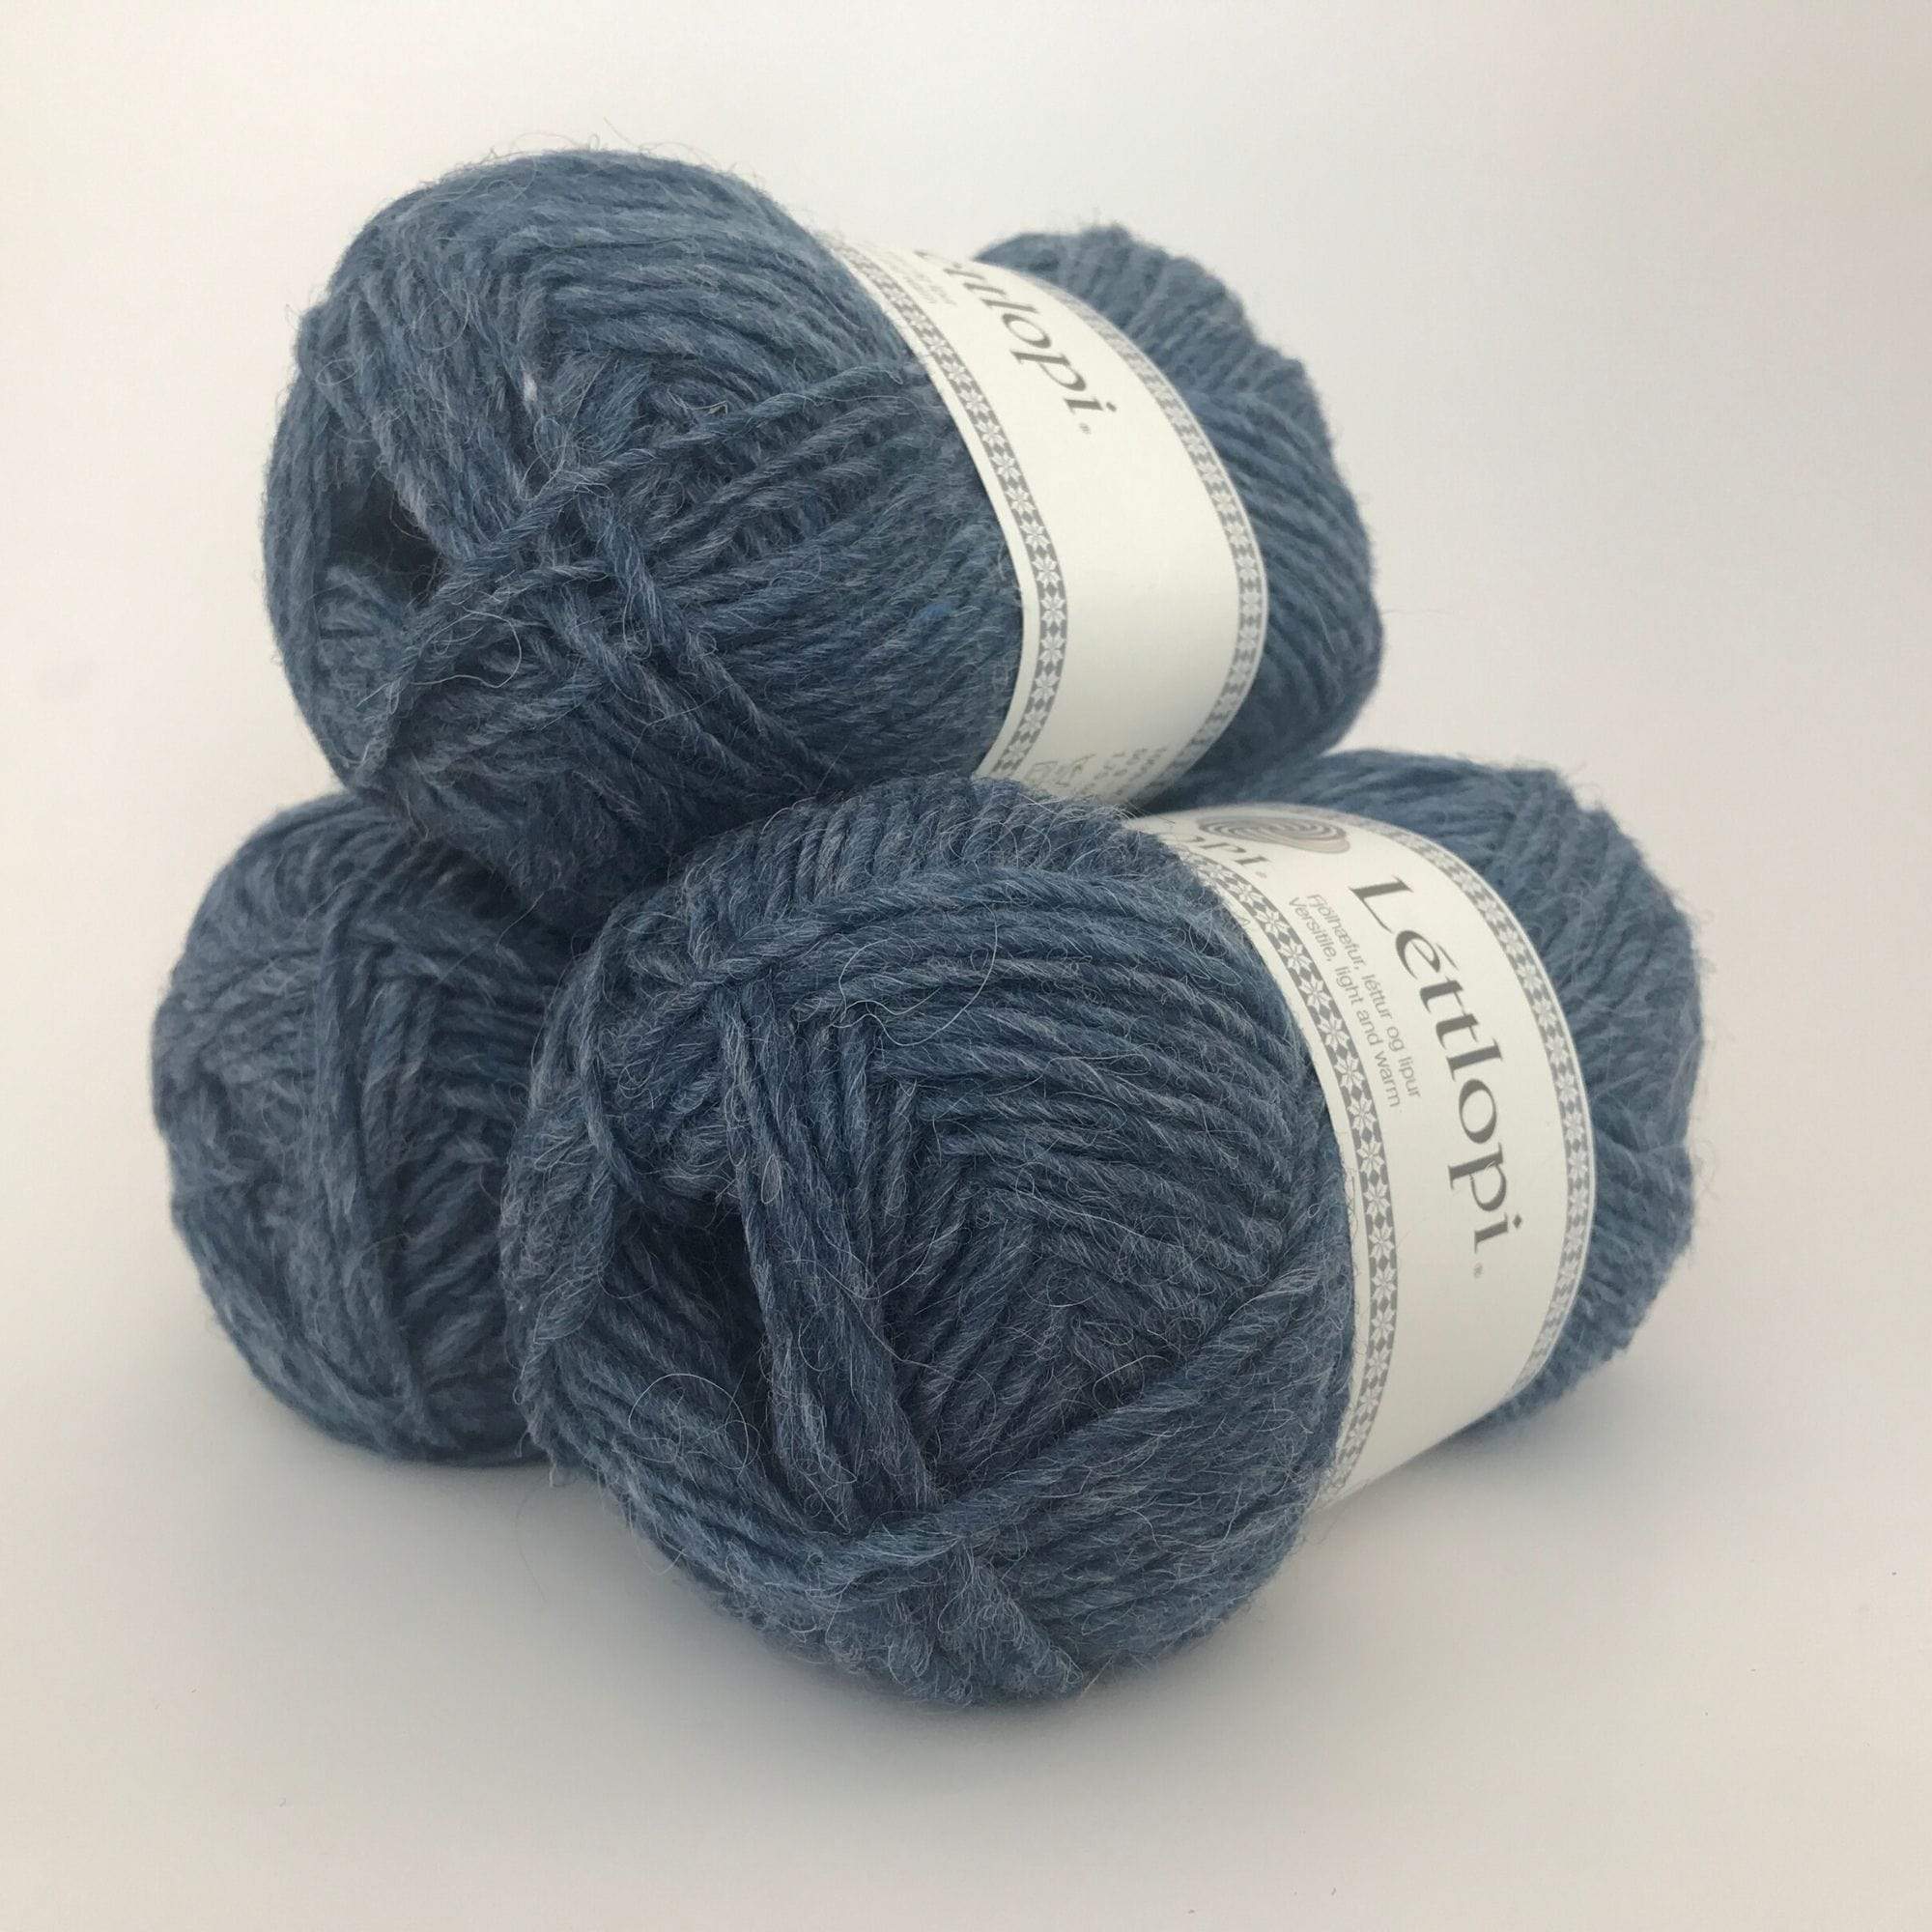 Ball of Lettlopi in colorway 1701 - fjord blue.